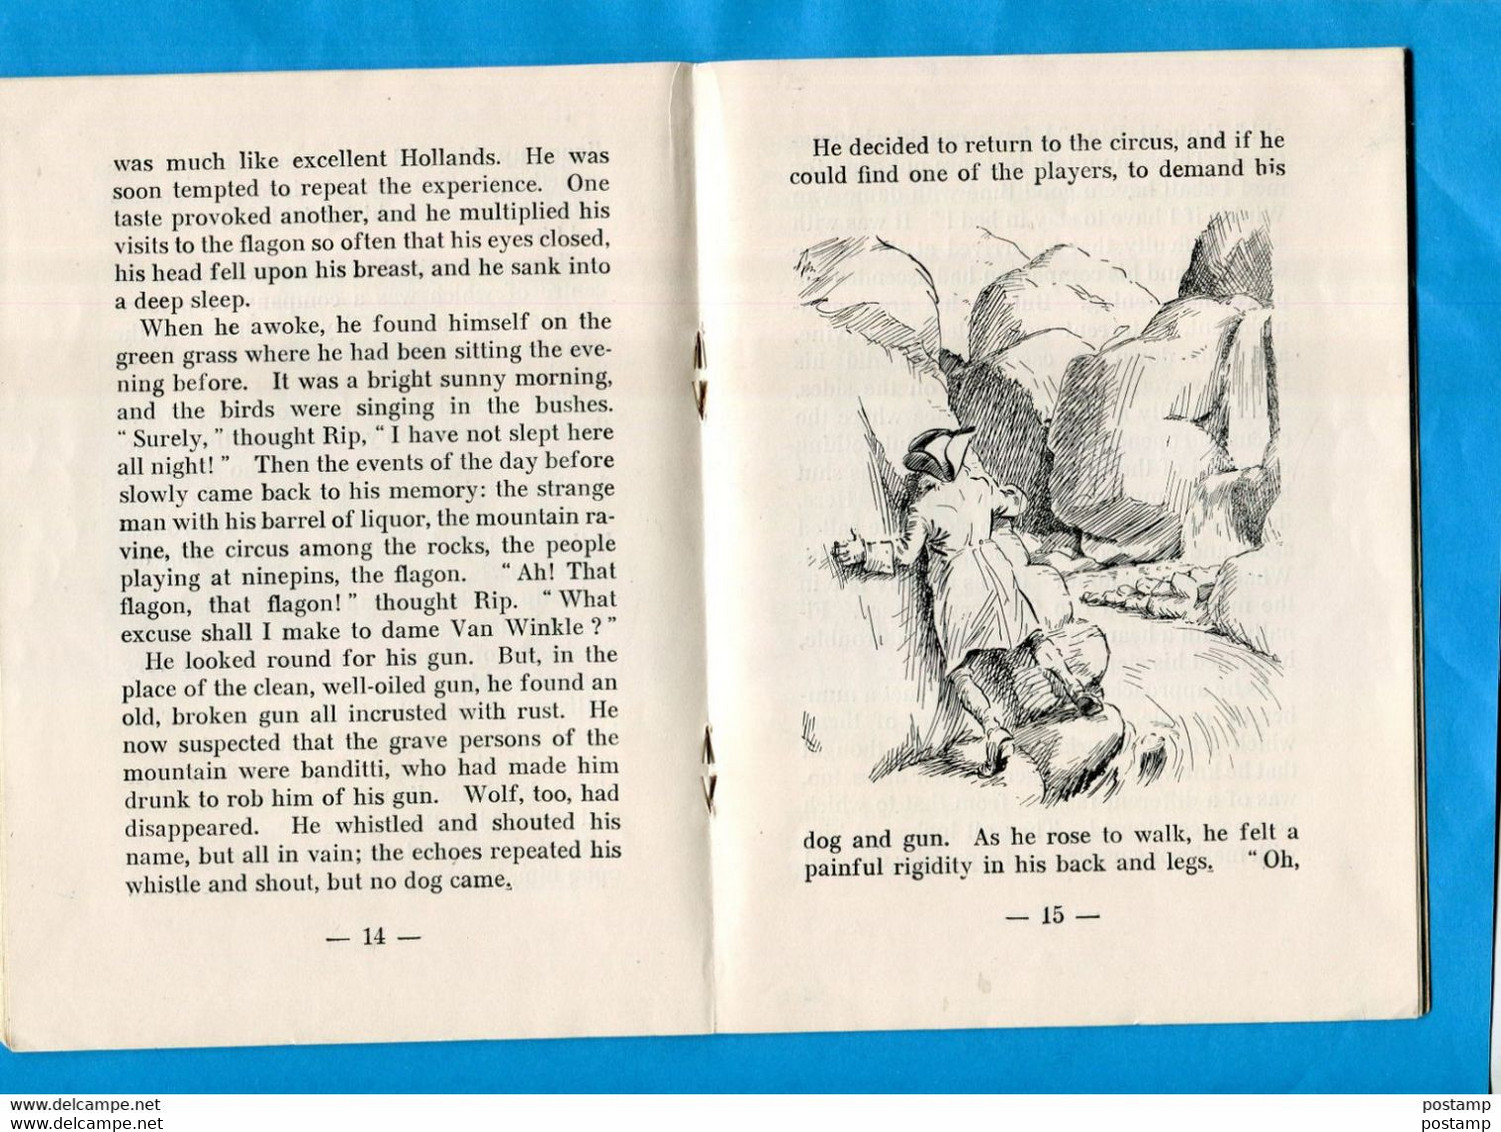 RIP VAN WINKLE-Tales From England-abridged And Simplified S ABRY-Illustrated G WIRWIN-13 Illustraions-1935 - Picture Books